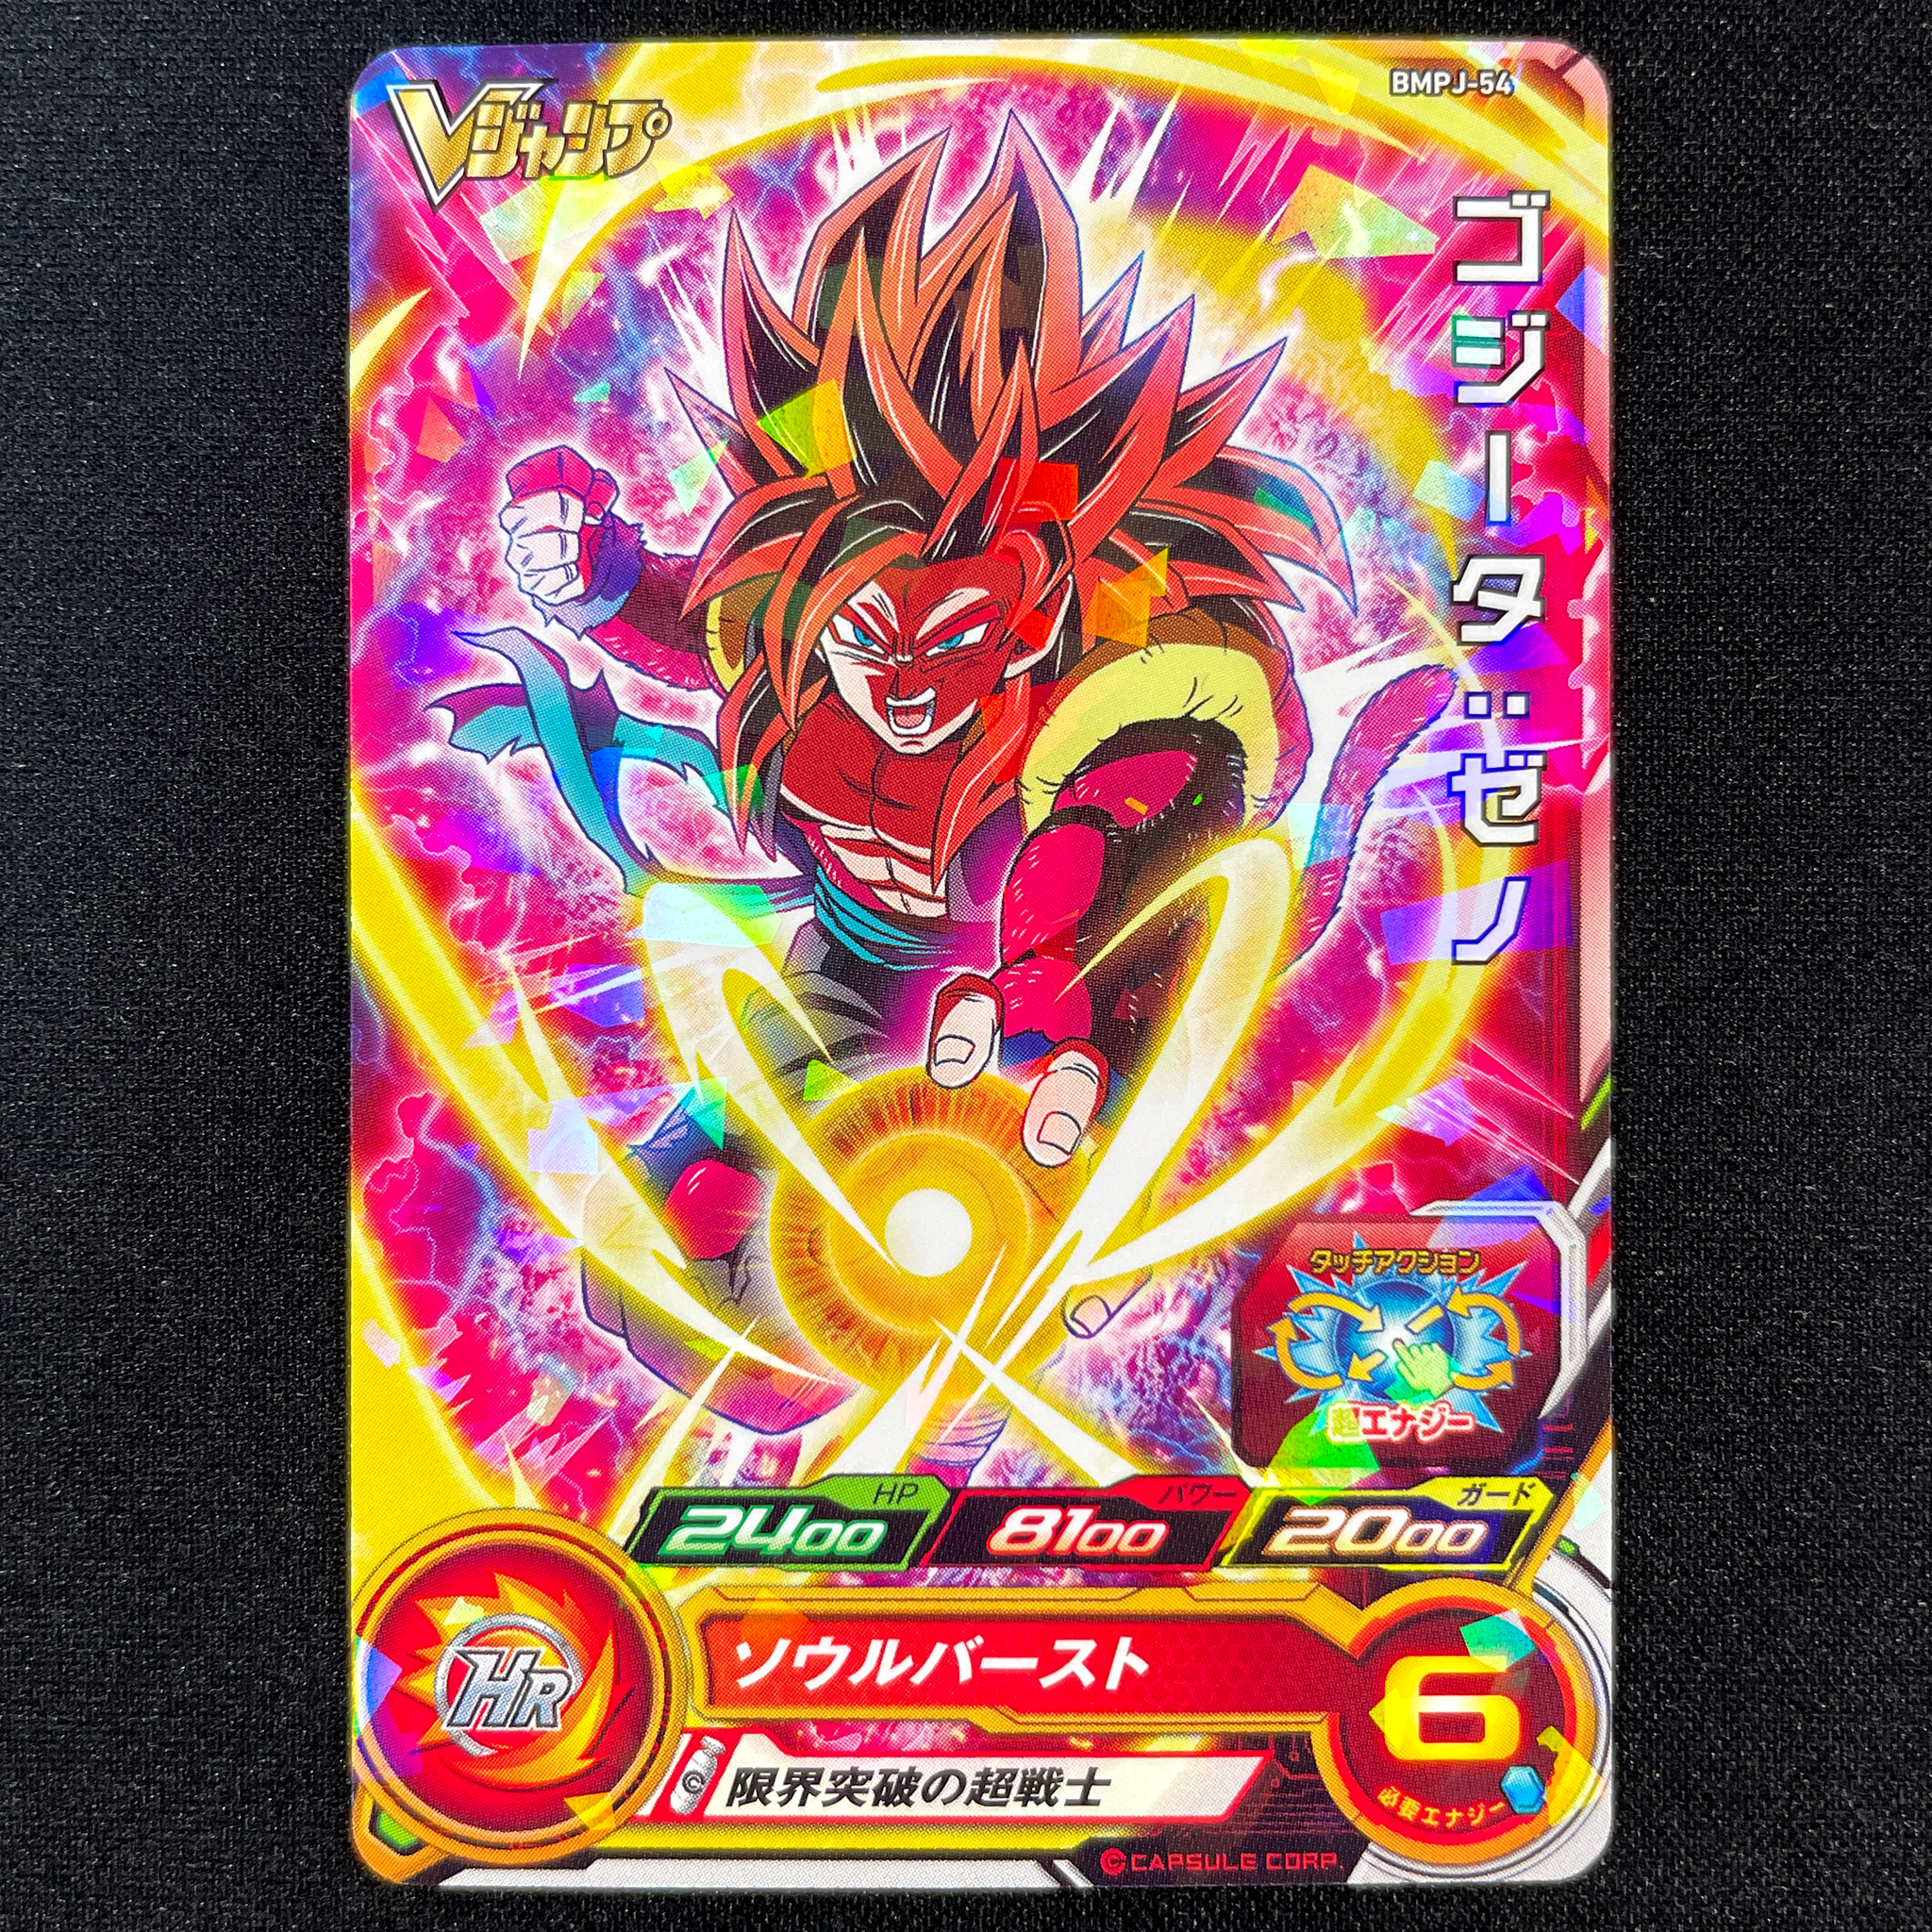 SUPER DRAGON BALL HEROES BMPJ-54  Promotional card sold with the March 2022 issue of V Jump magazine released January 21 2022.  BMPJ-54 Gogeta : Xeno